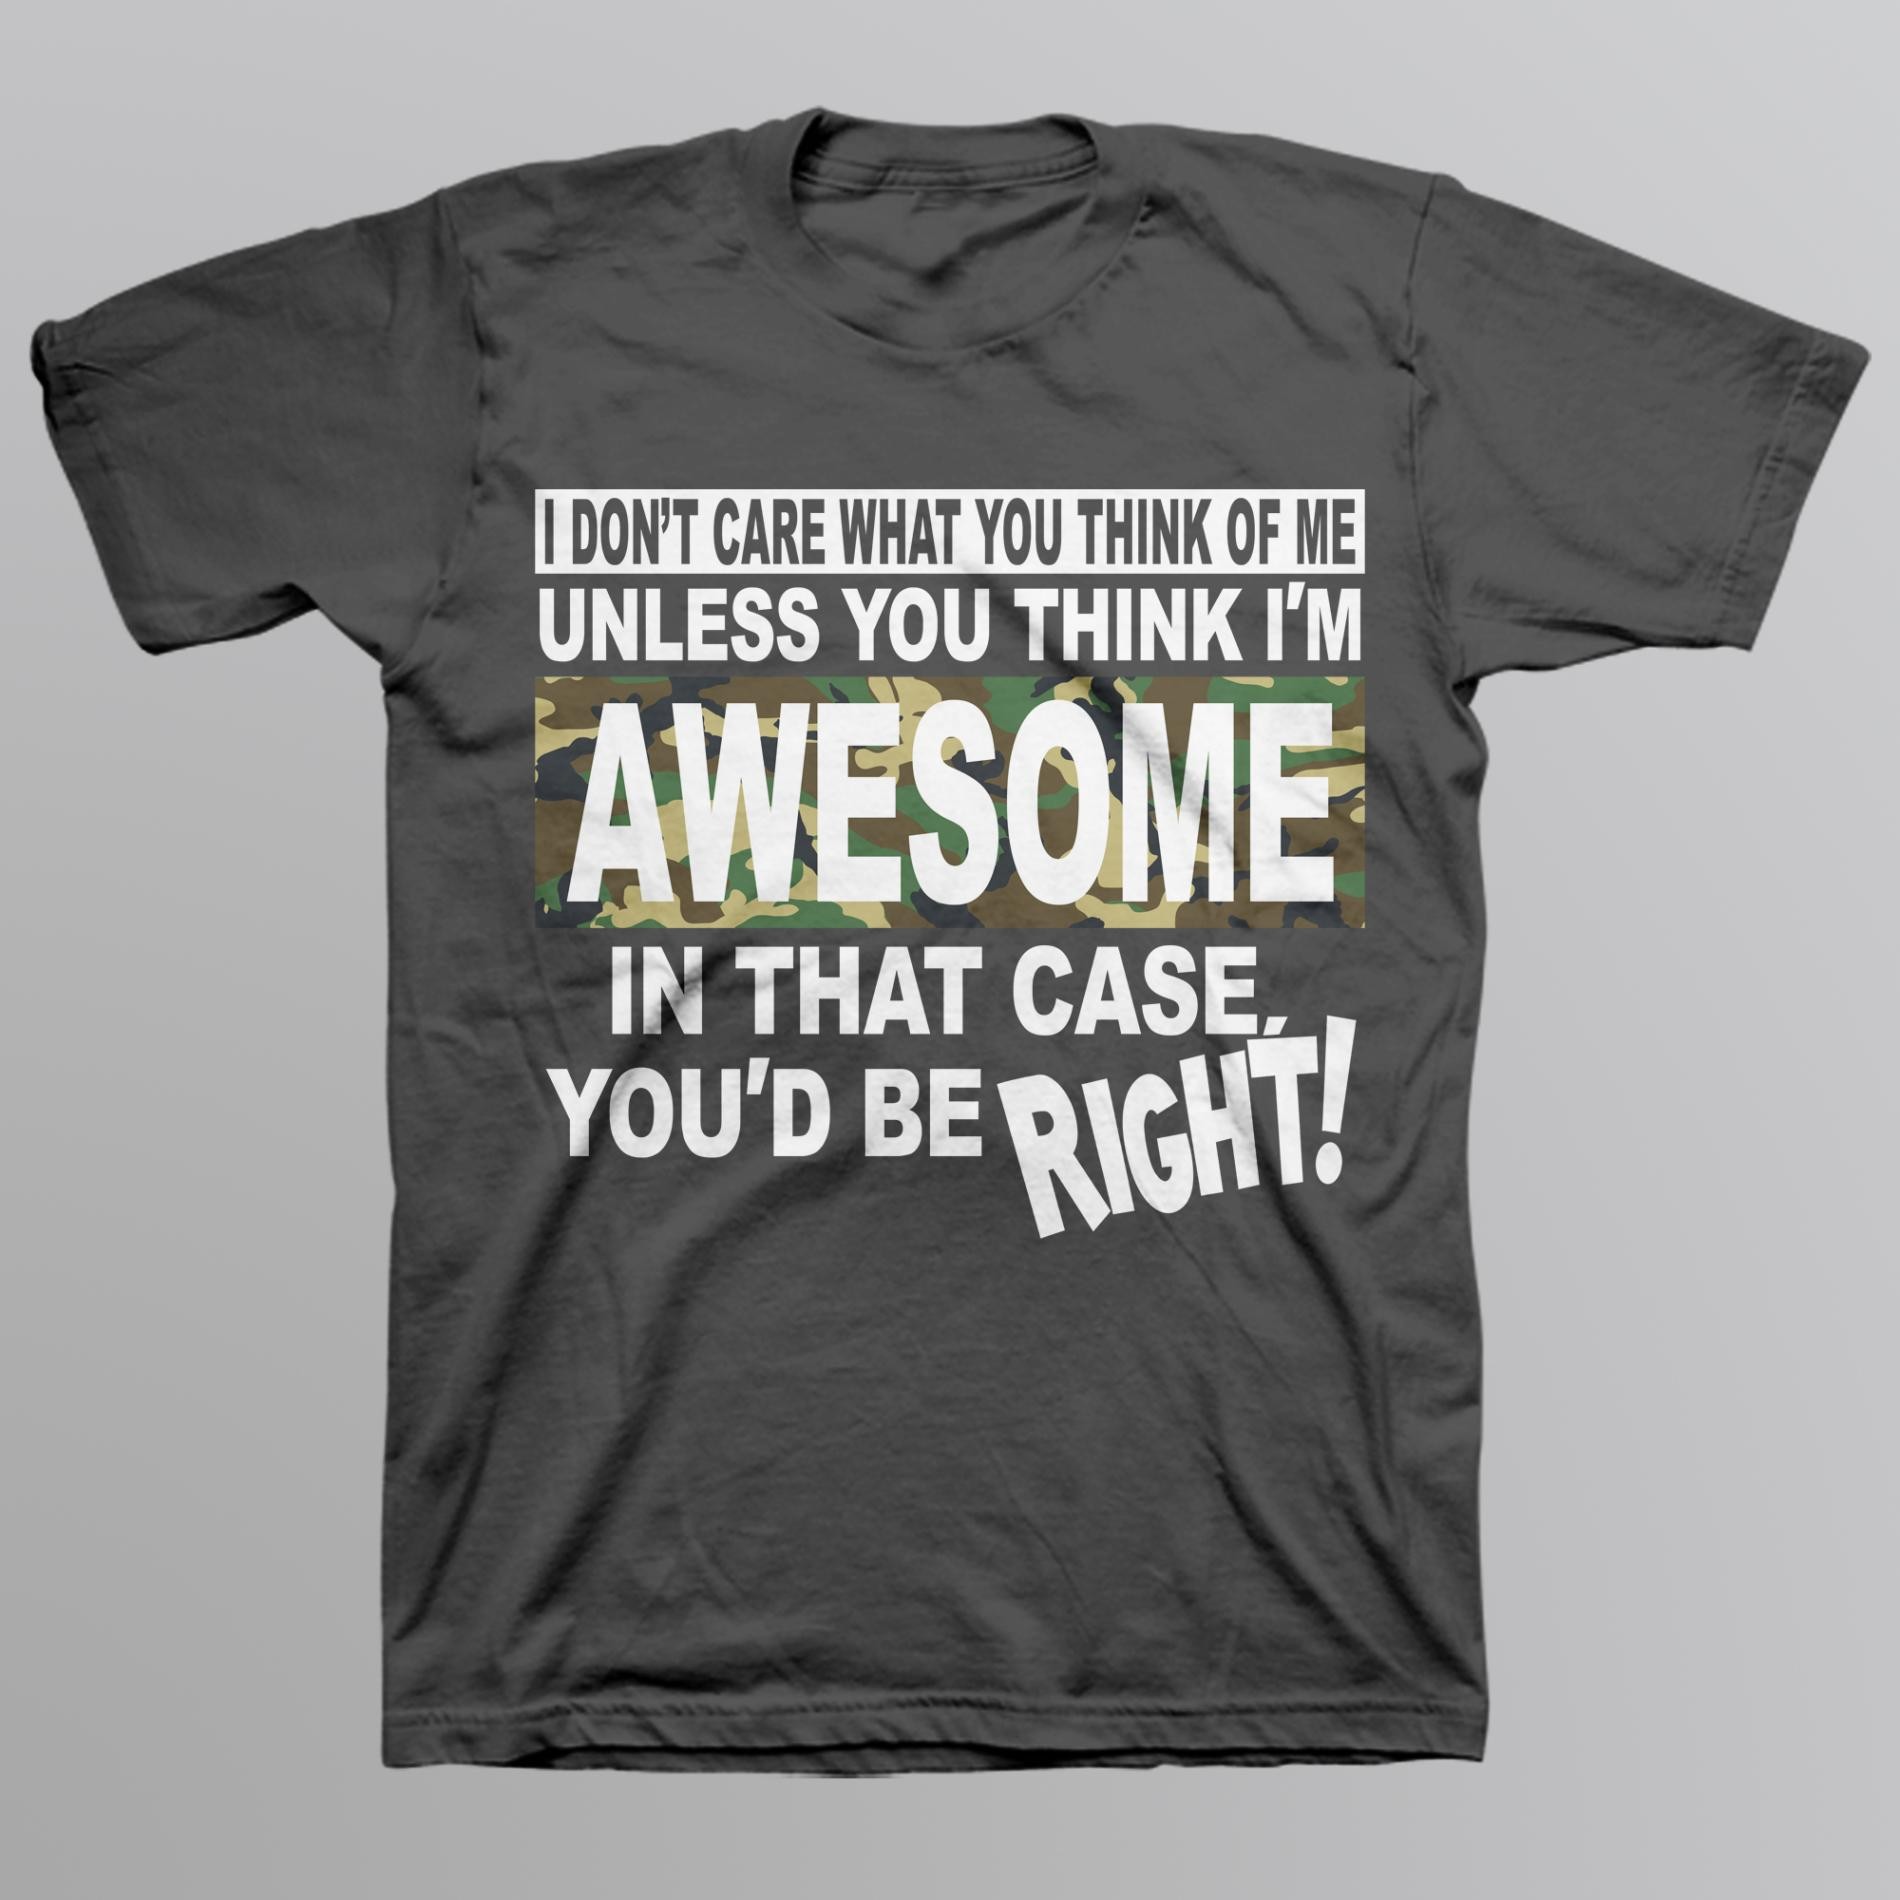 Route 66 Boy's Graphic T-Shirt - You Think I'm Awesome